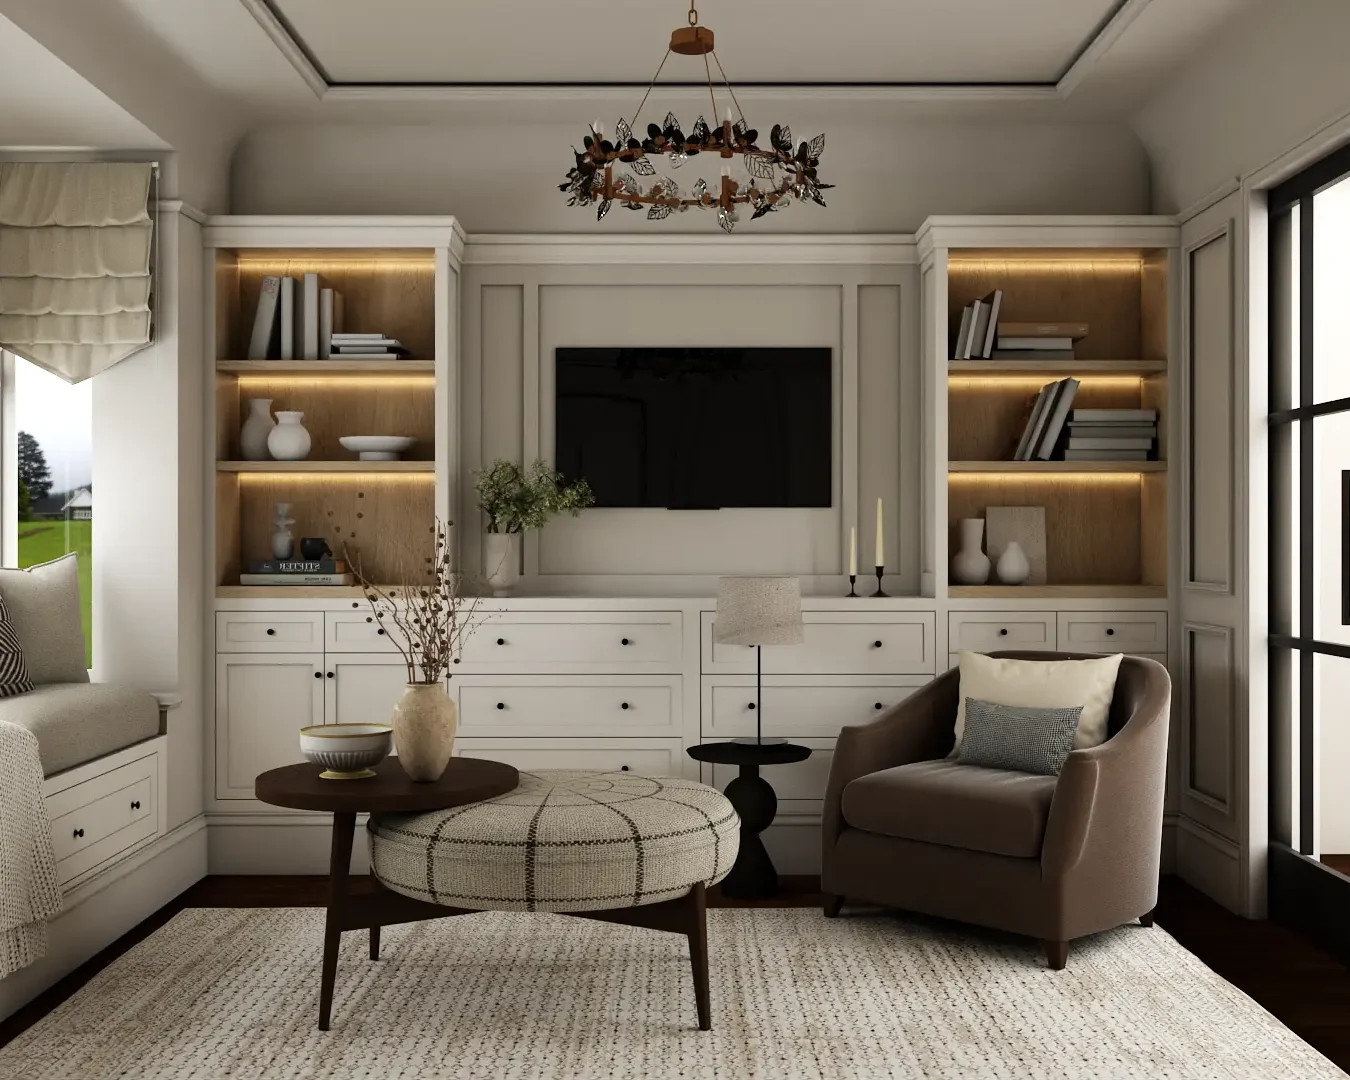 Elegant living room with built-in bookcases, comfortable seating, and cozy decor, combining traditional elegance with modern living. Design by Debora, an online interior design service.